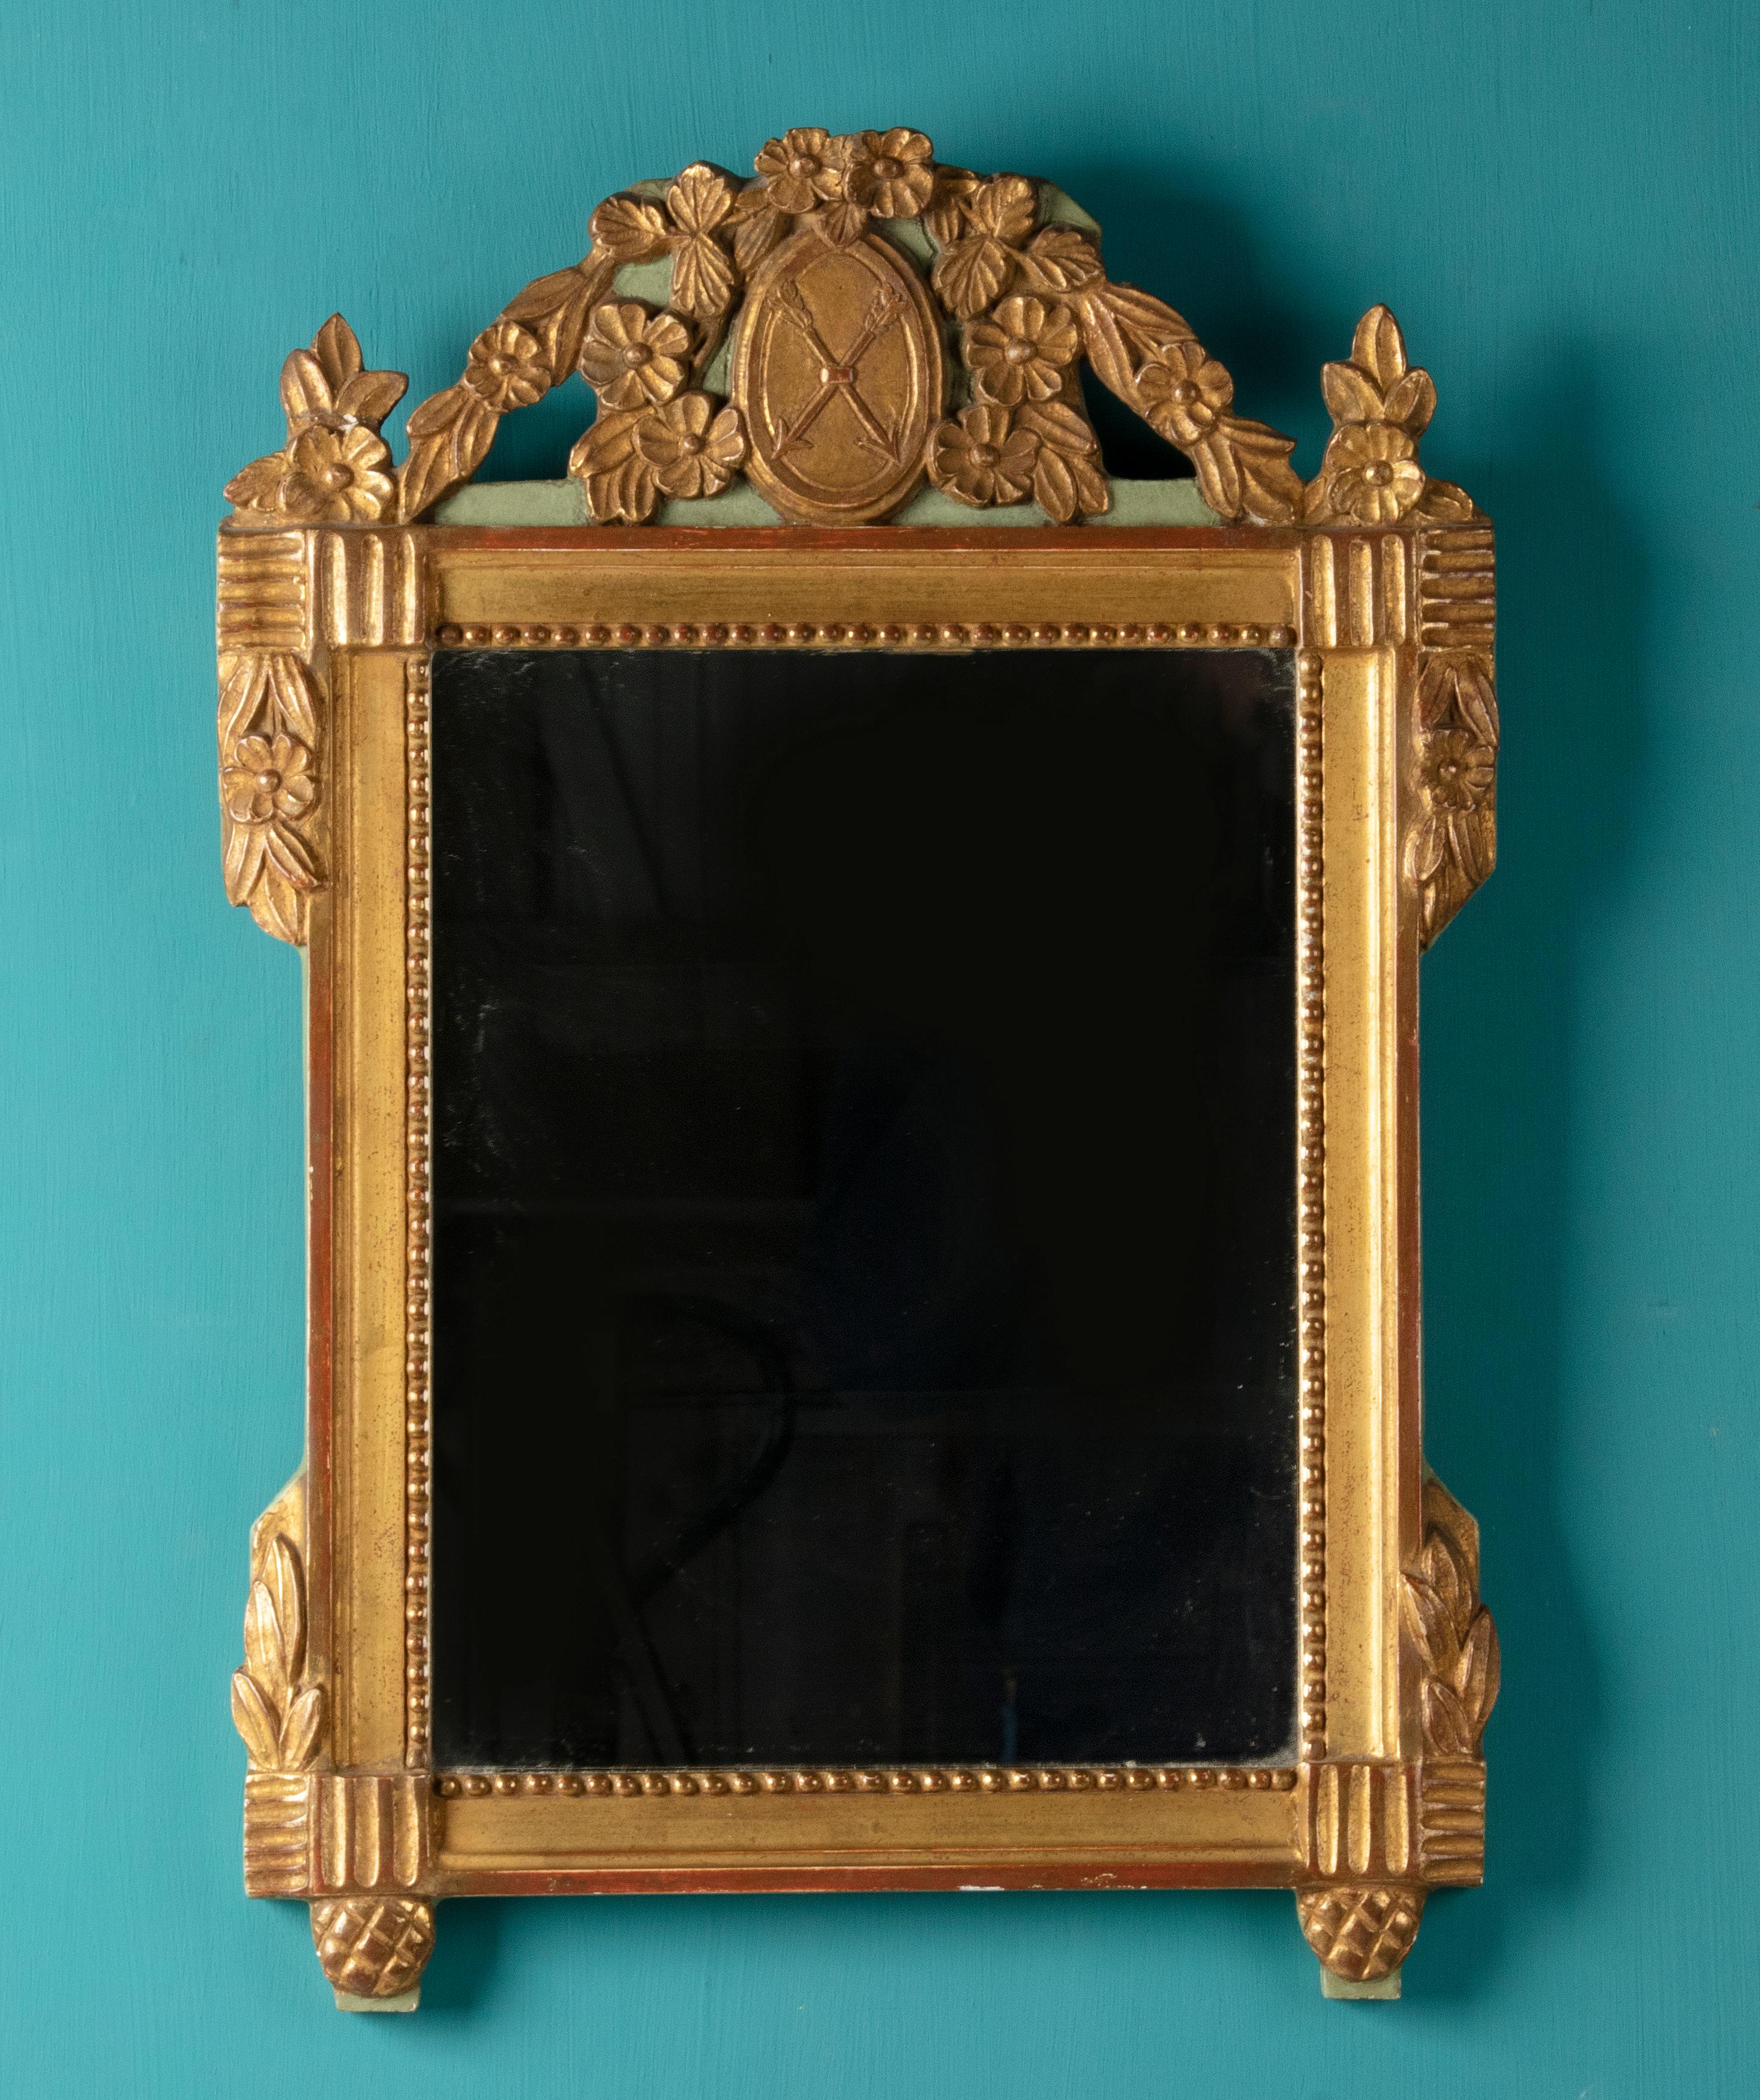 Decorative mirror in Louis XVI style. The mirror dates from circa 1930 and is made of a kind of resin casting, then gilded. The mirror is made after an antique model.